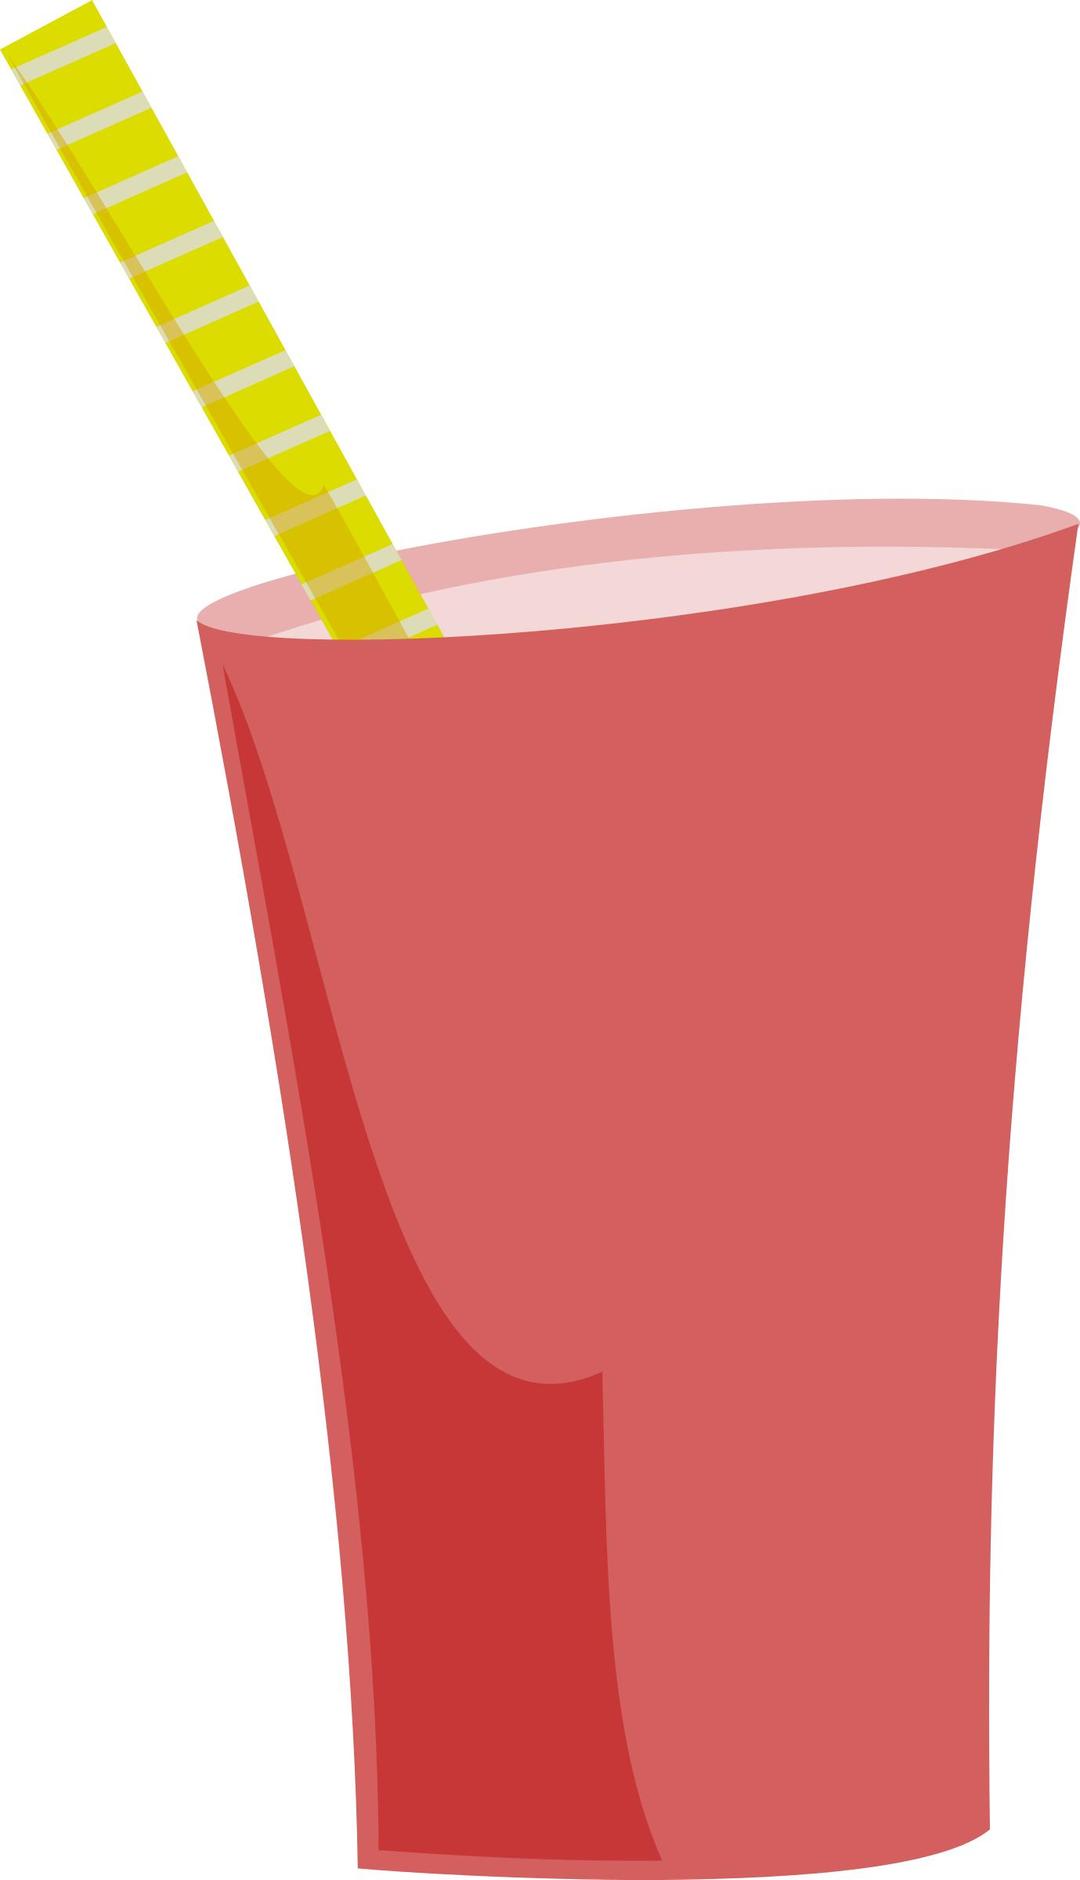 Thick Shake png transparent